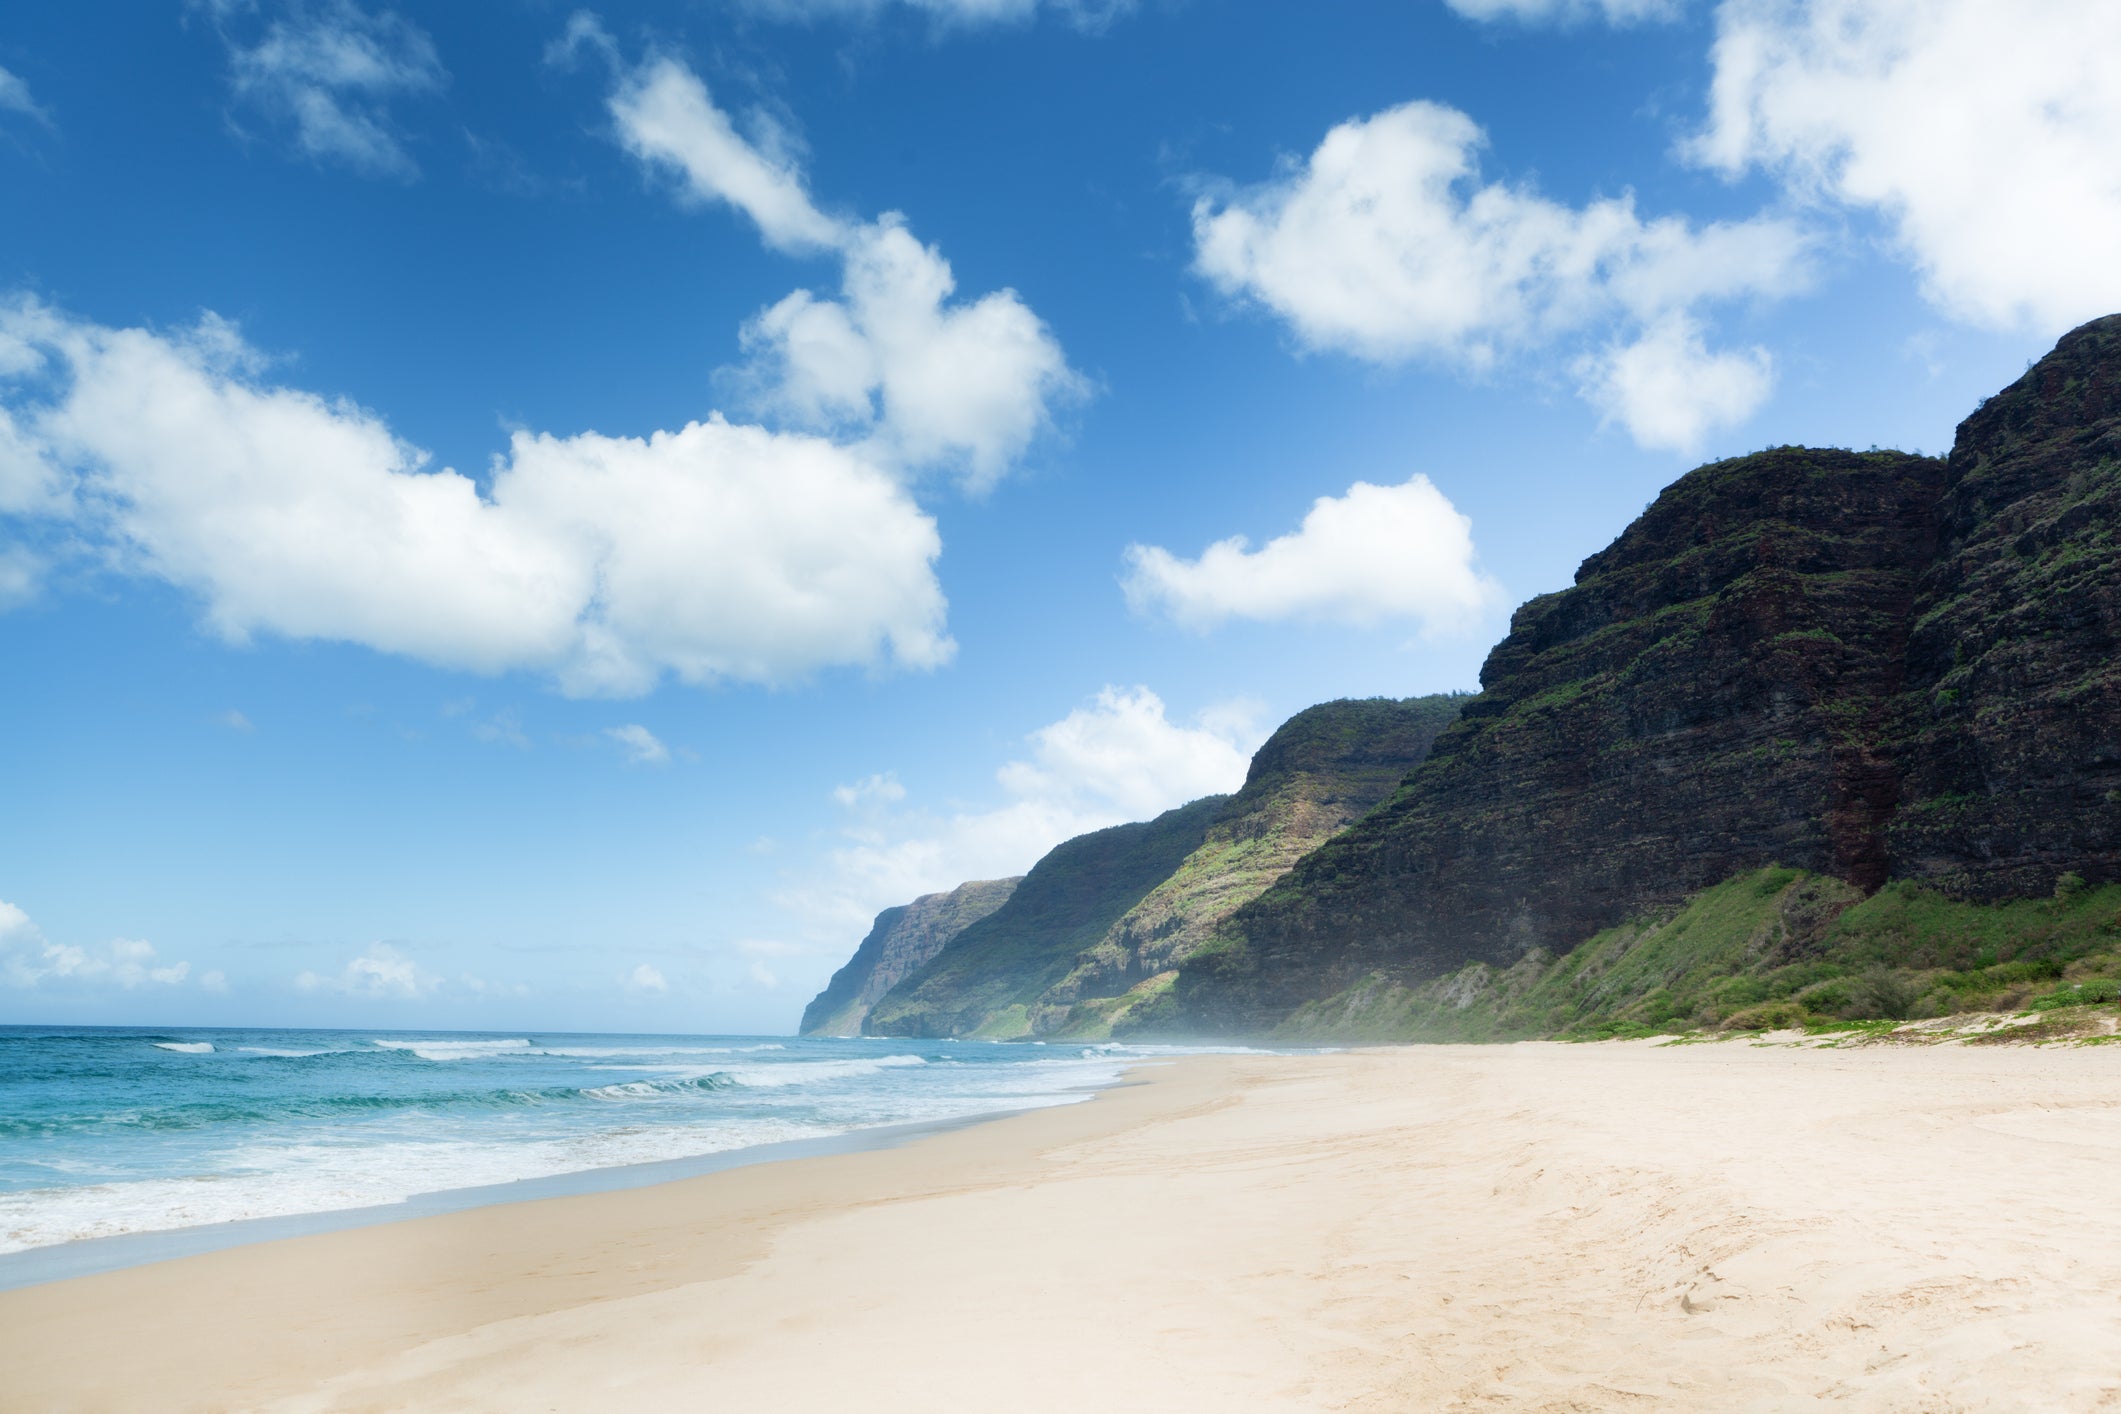 Travellers who really want to escape the crowds should head to the remote Polihale Beach